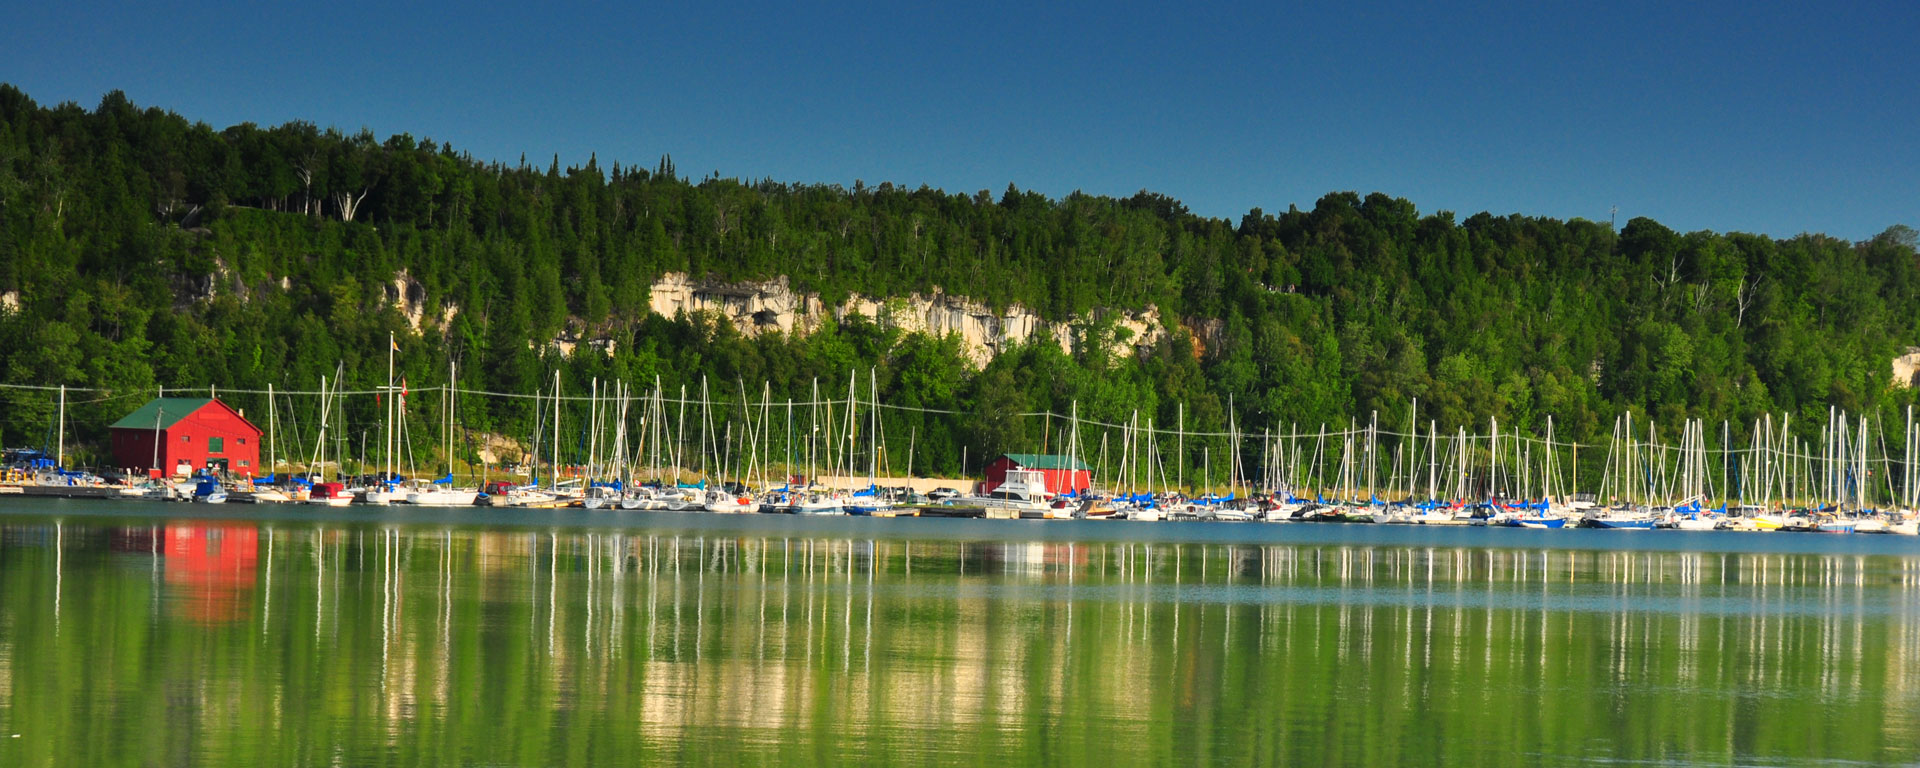 A wide shot of a marina in Wiarton. The surface of the lake is still